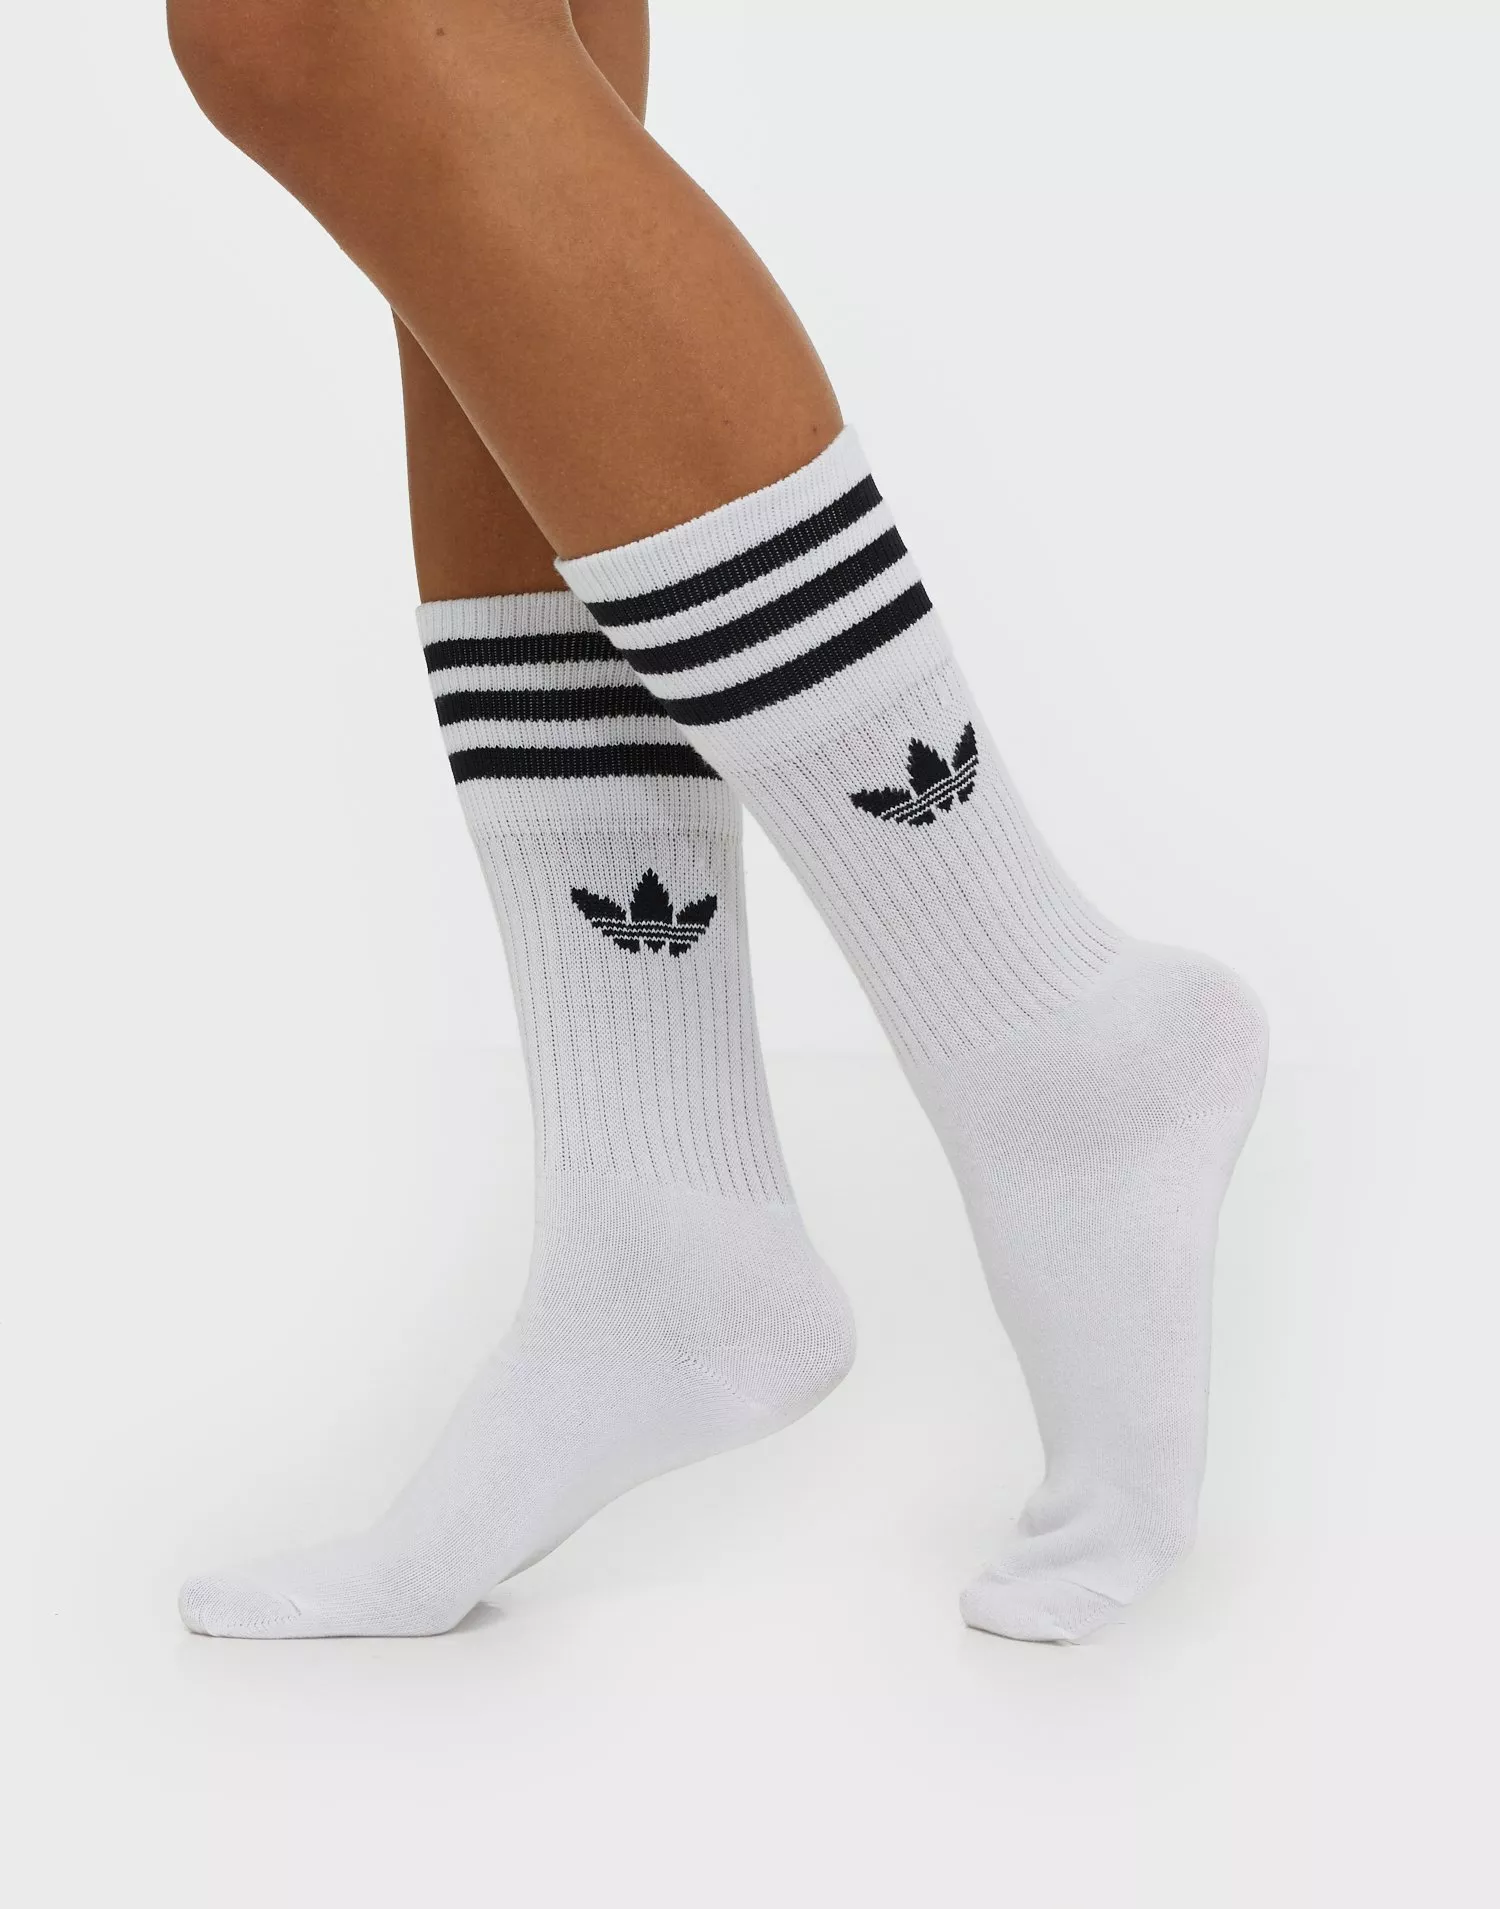 Consequent Rook Spookachtig Buy Adidas Originals SOLID CREW SOCK - White | Nelly.com